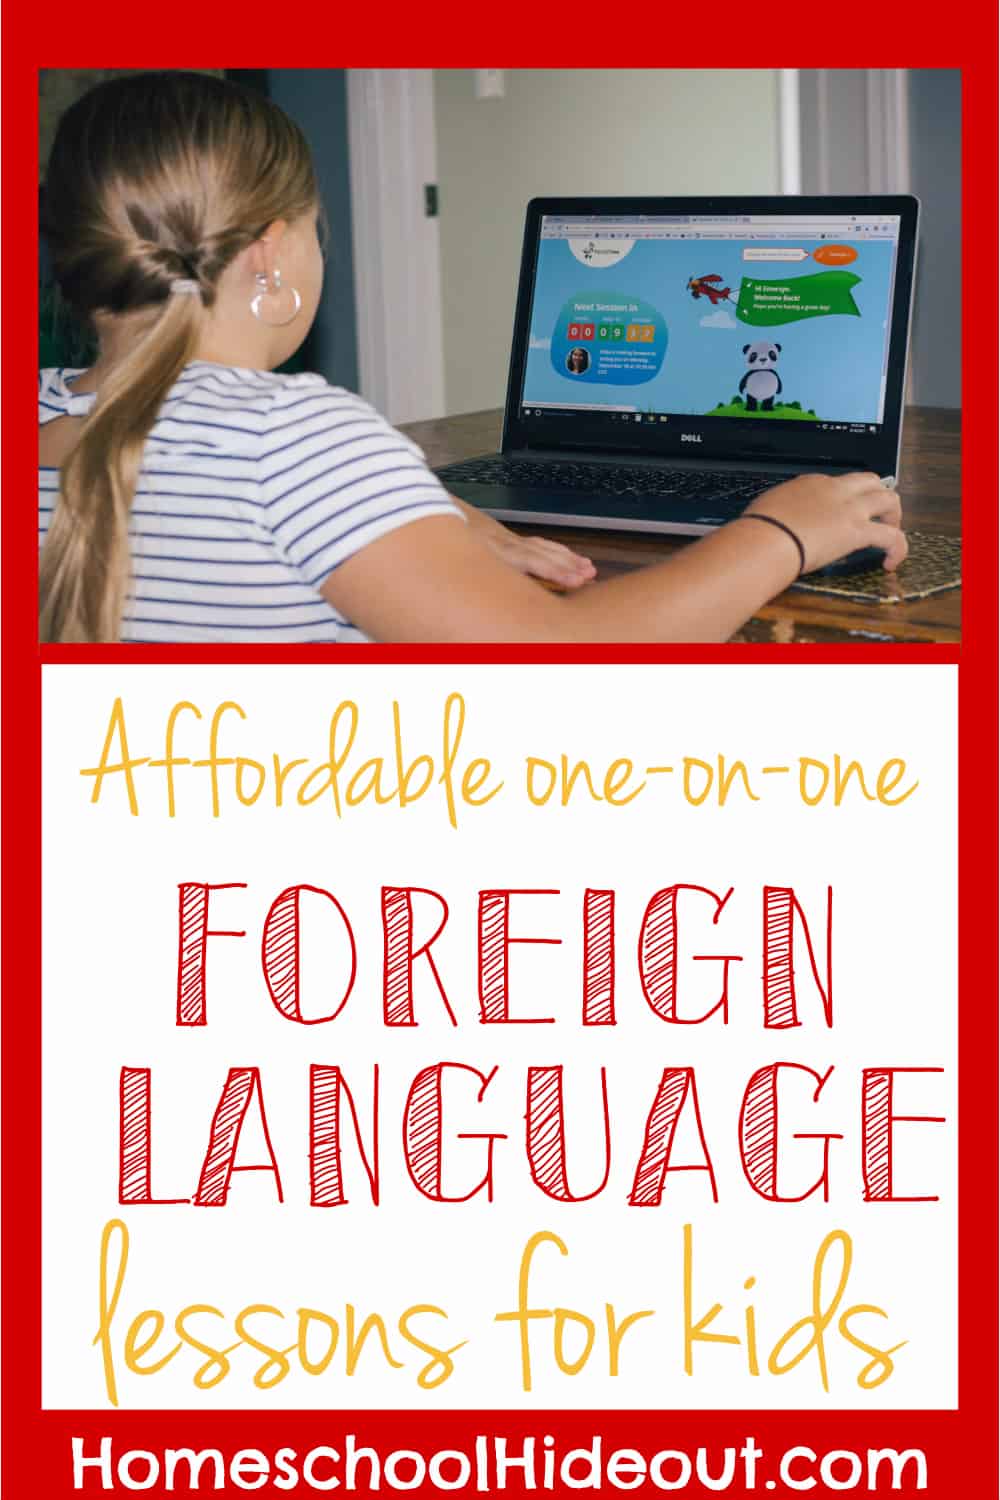 Foreign language lessons for kids don't have to be expensive! With PandaTree.com, kids will fall in love with learning from their tutor!